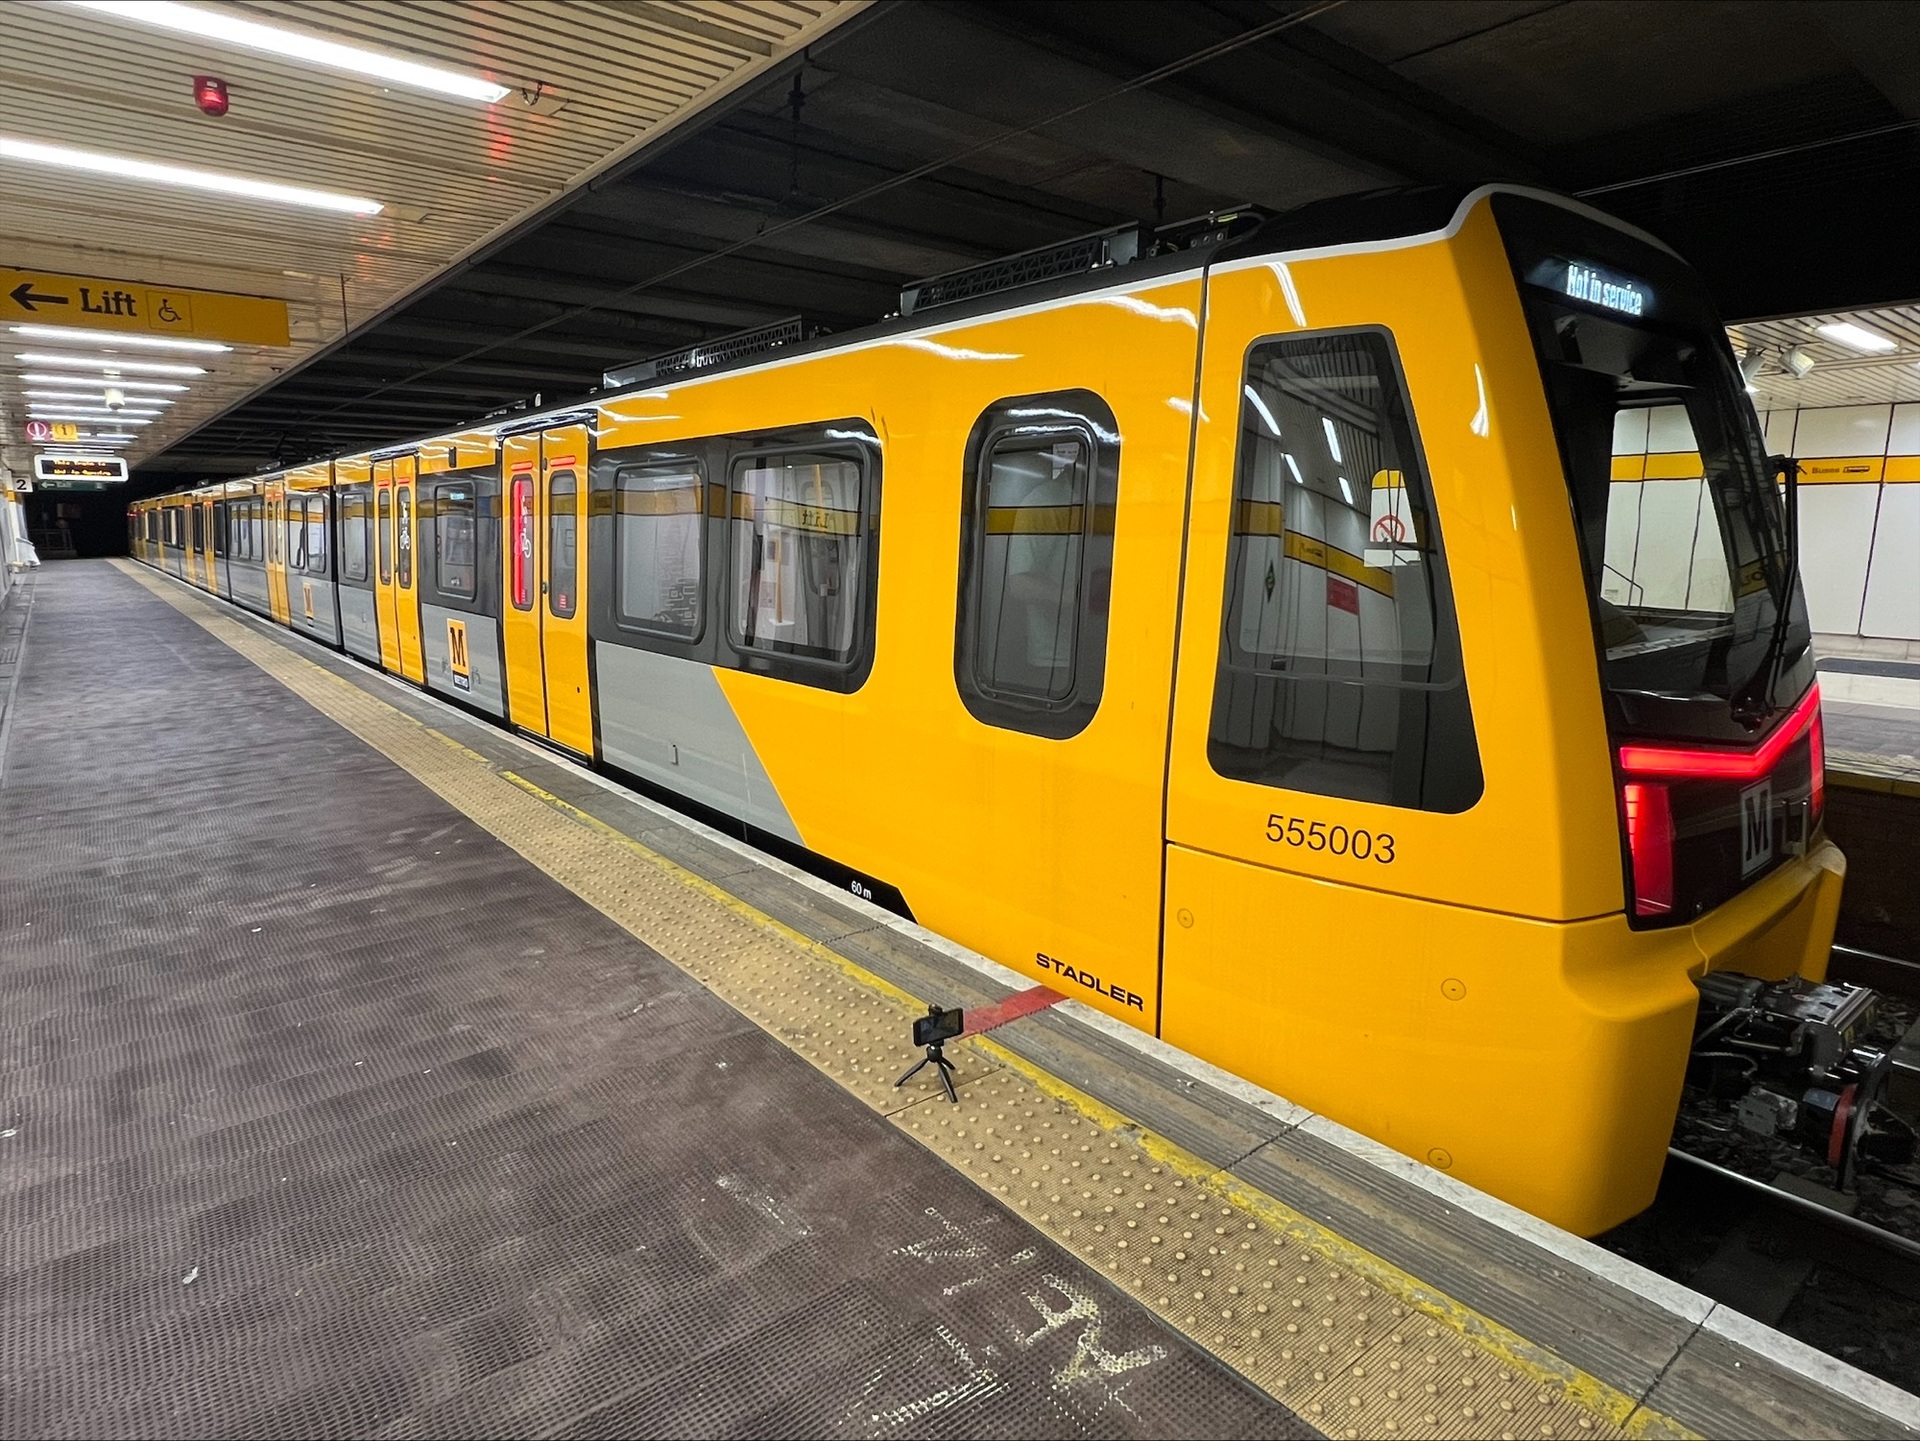 The Stadler Class 555 Metro train, the first of 46 that Nexus has on order, is undergoing a period of testing and driver training before entering service for customers.